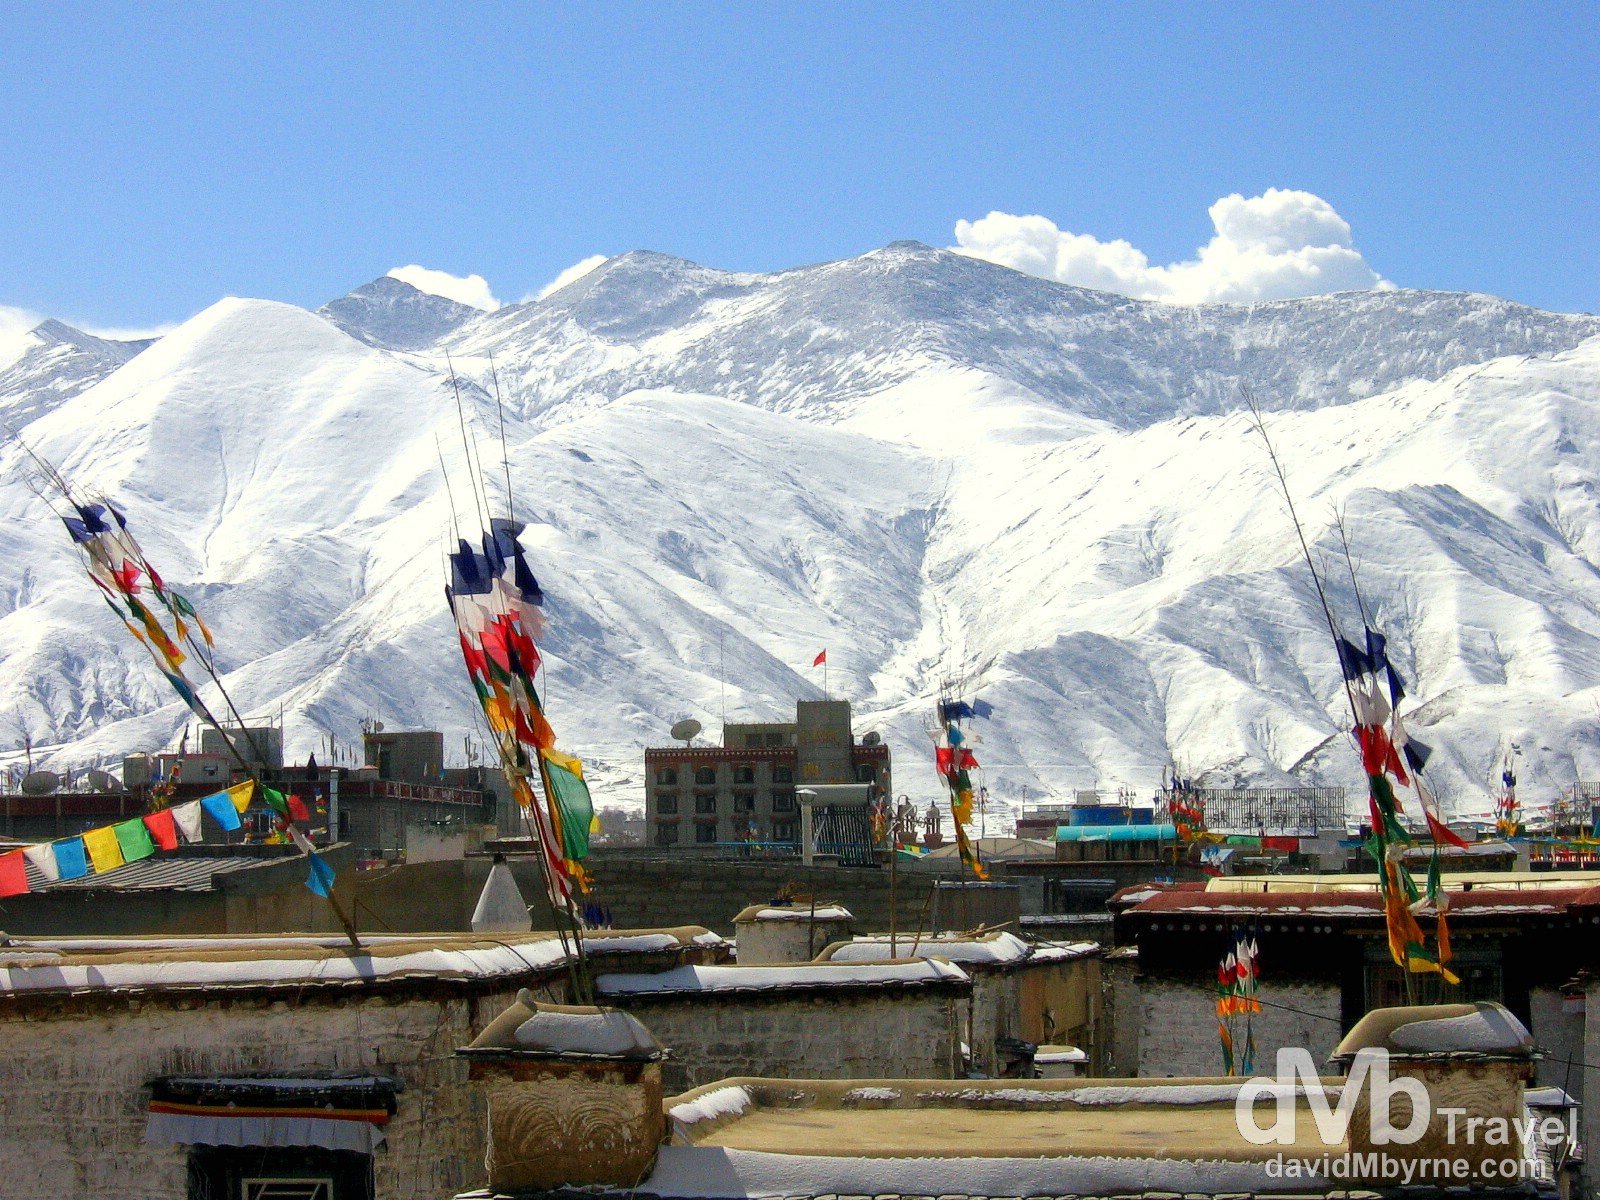 The view of the surrounding Himalaya Mountains from the rooftop of the Jokhang Temple, Lhasa, Tibet. February 27th 2008.